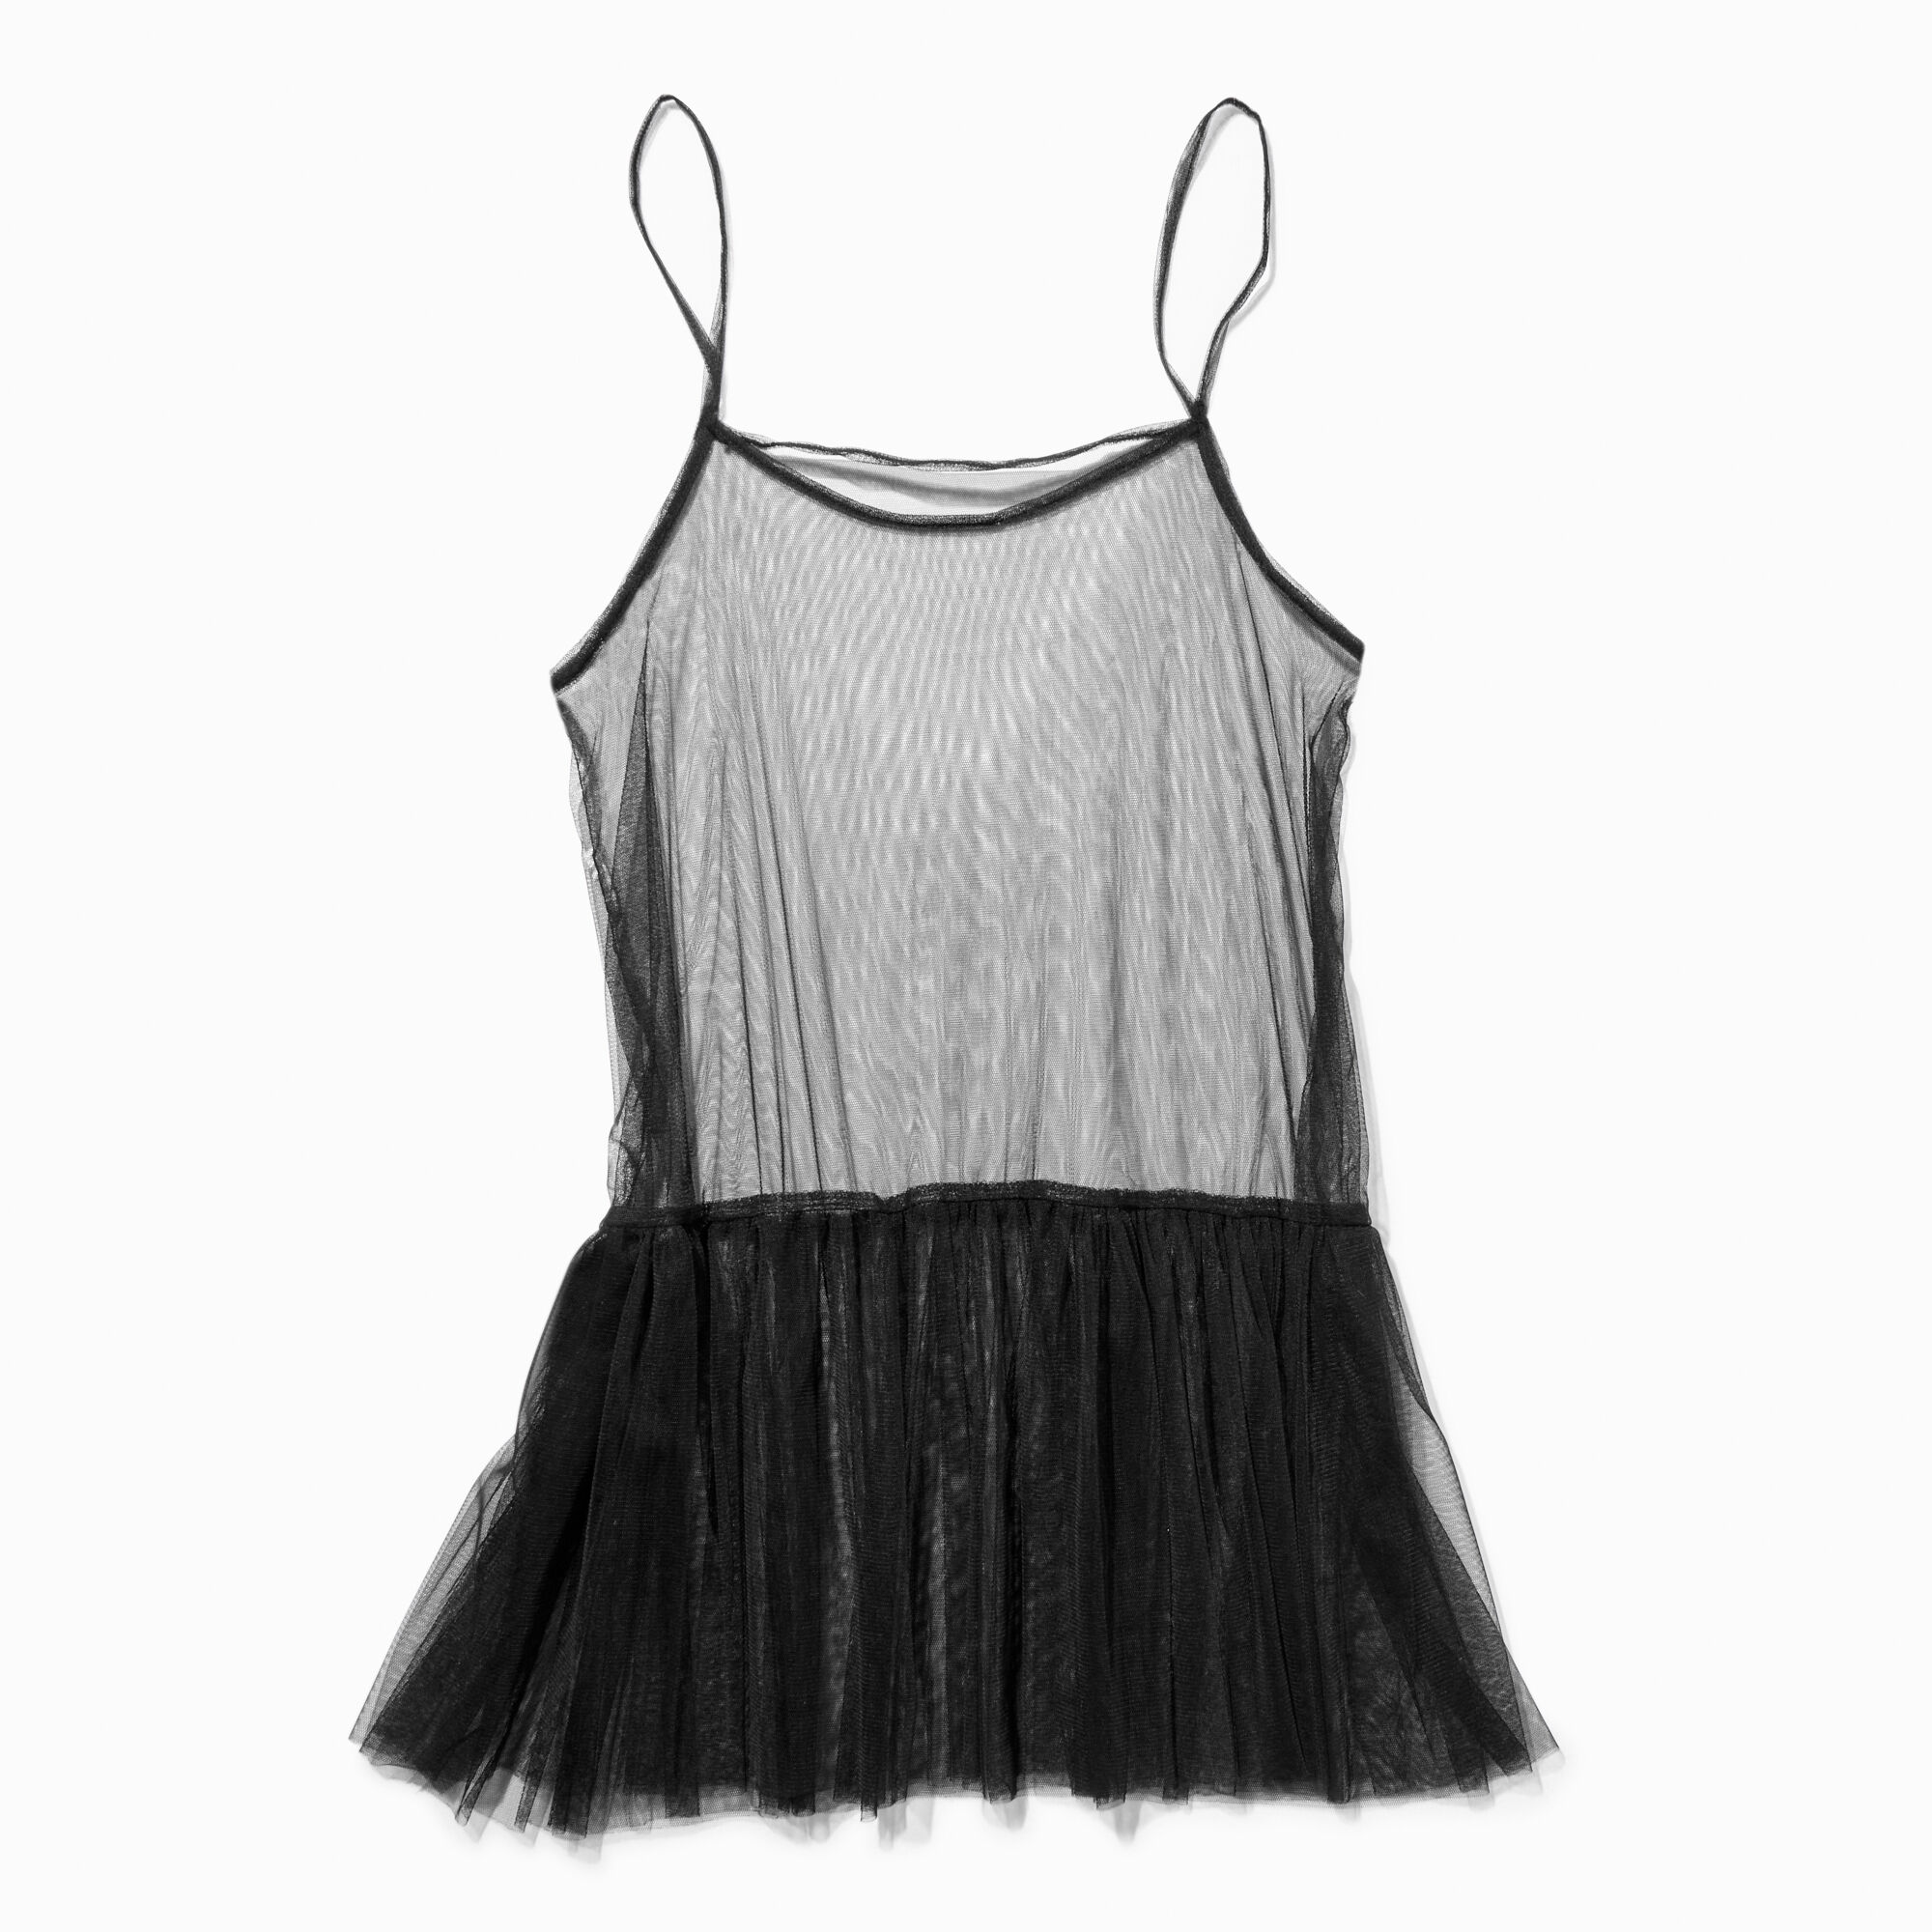 View Claires Sheer Tulle Tank Dress Black information